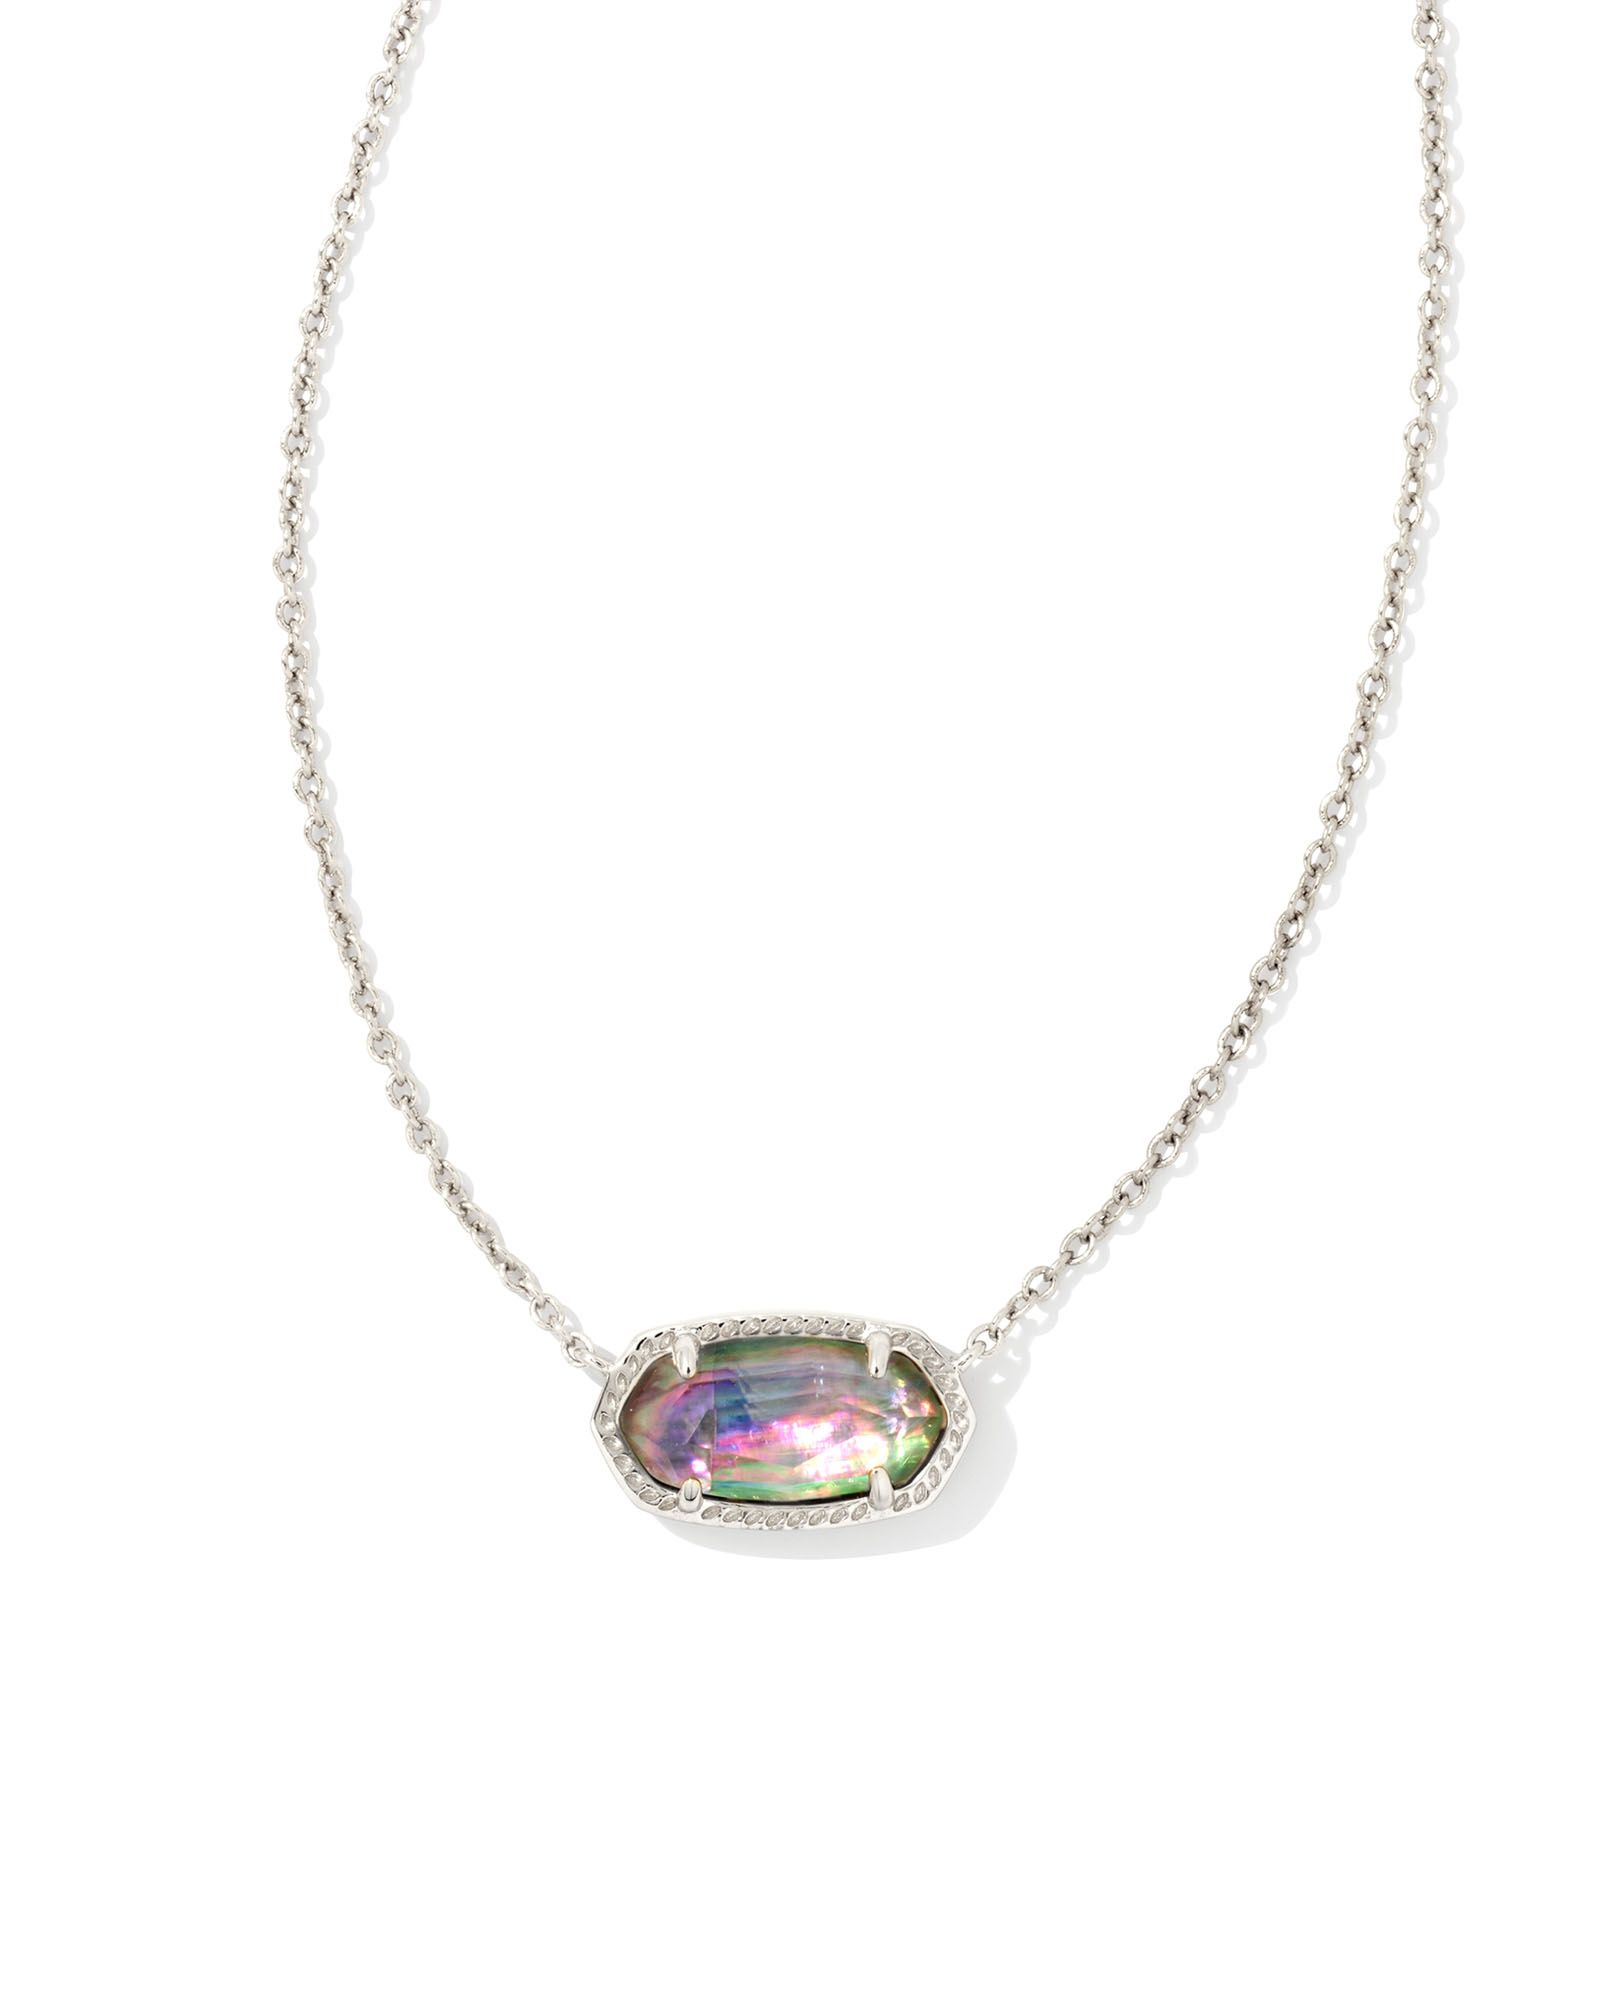 Elisa Silver Pendant Necklace in Lilac Abalone | Kendra Scott